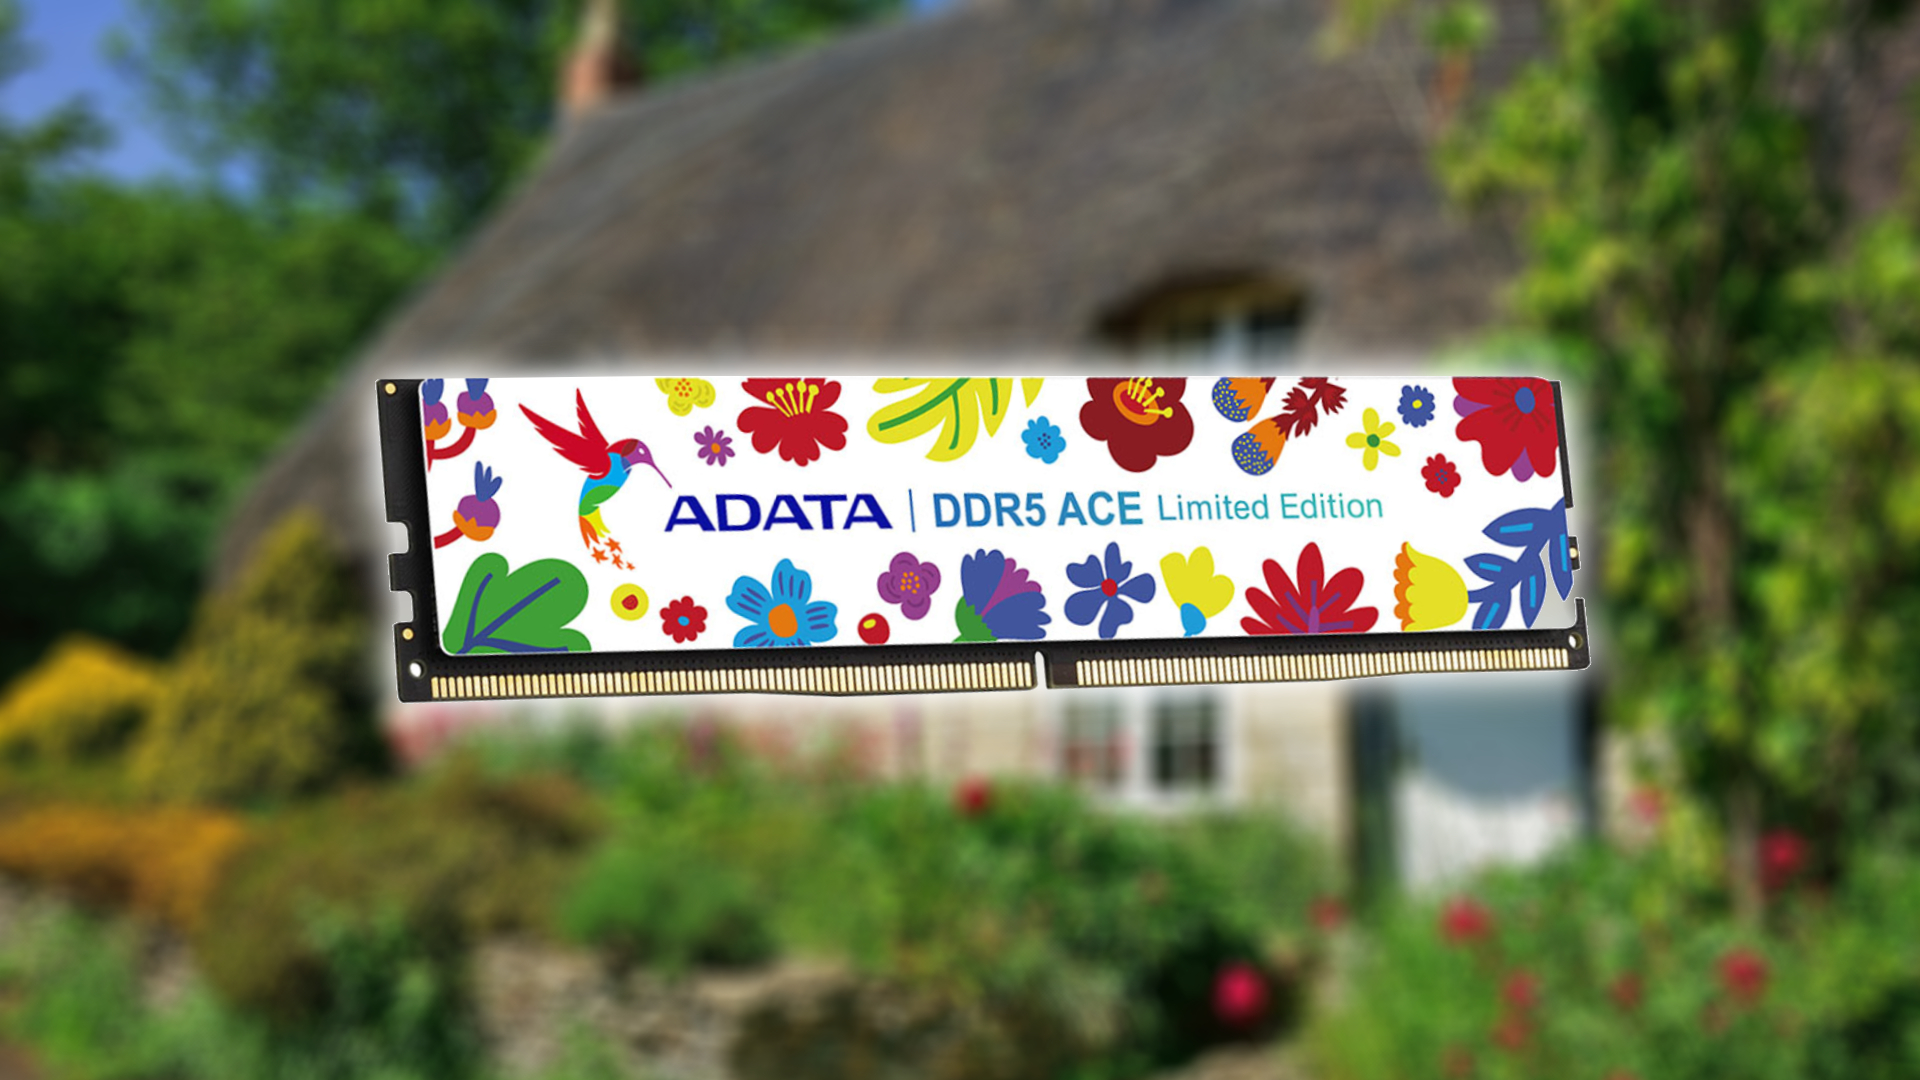 Adata just announced cottagecore DDR5 gaming RAM